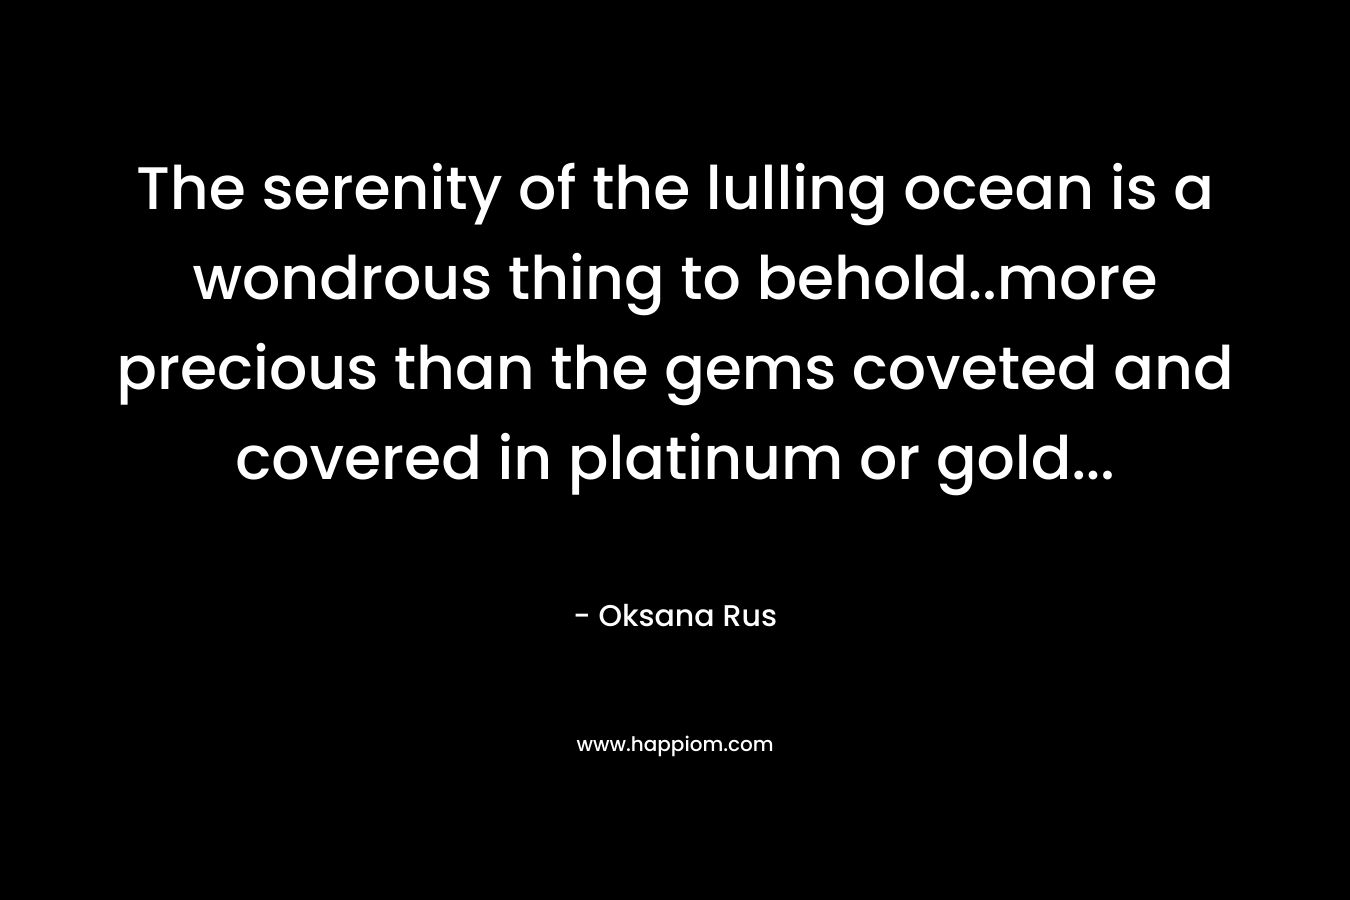 The serenity of the lulling ocean is a wondrous thing to behold..more precious than the gems coveted and covered in platinum or gold… – Oksana Rus